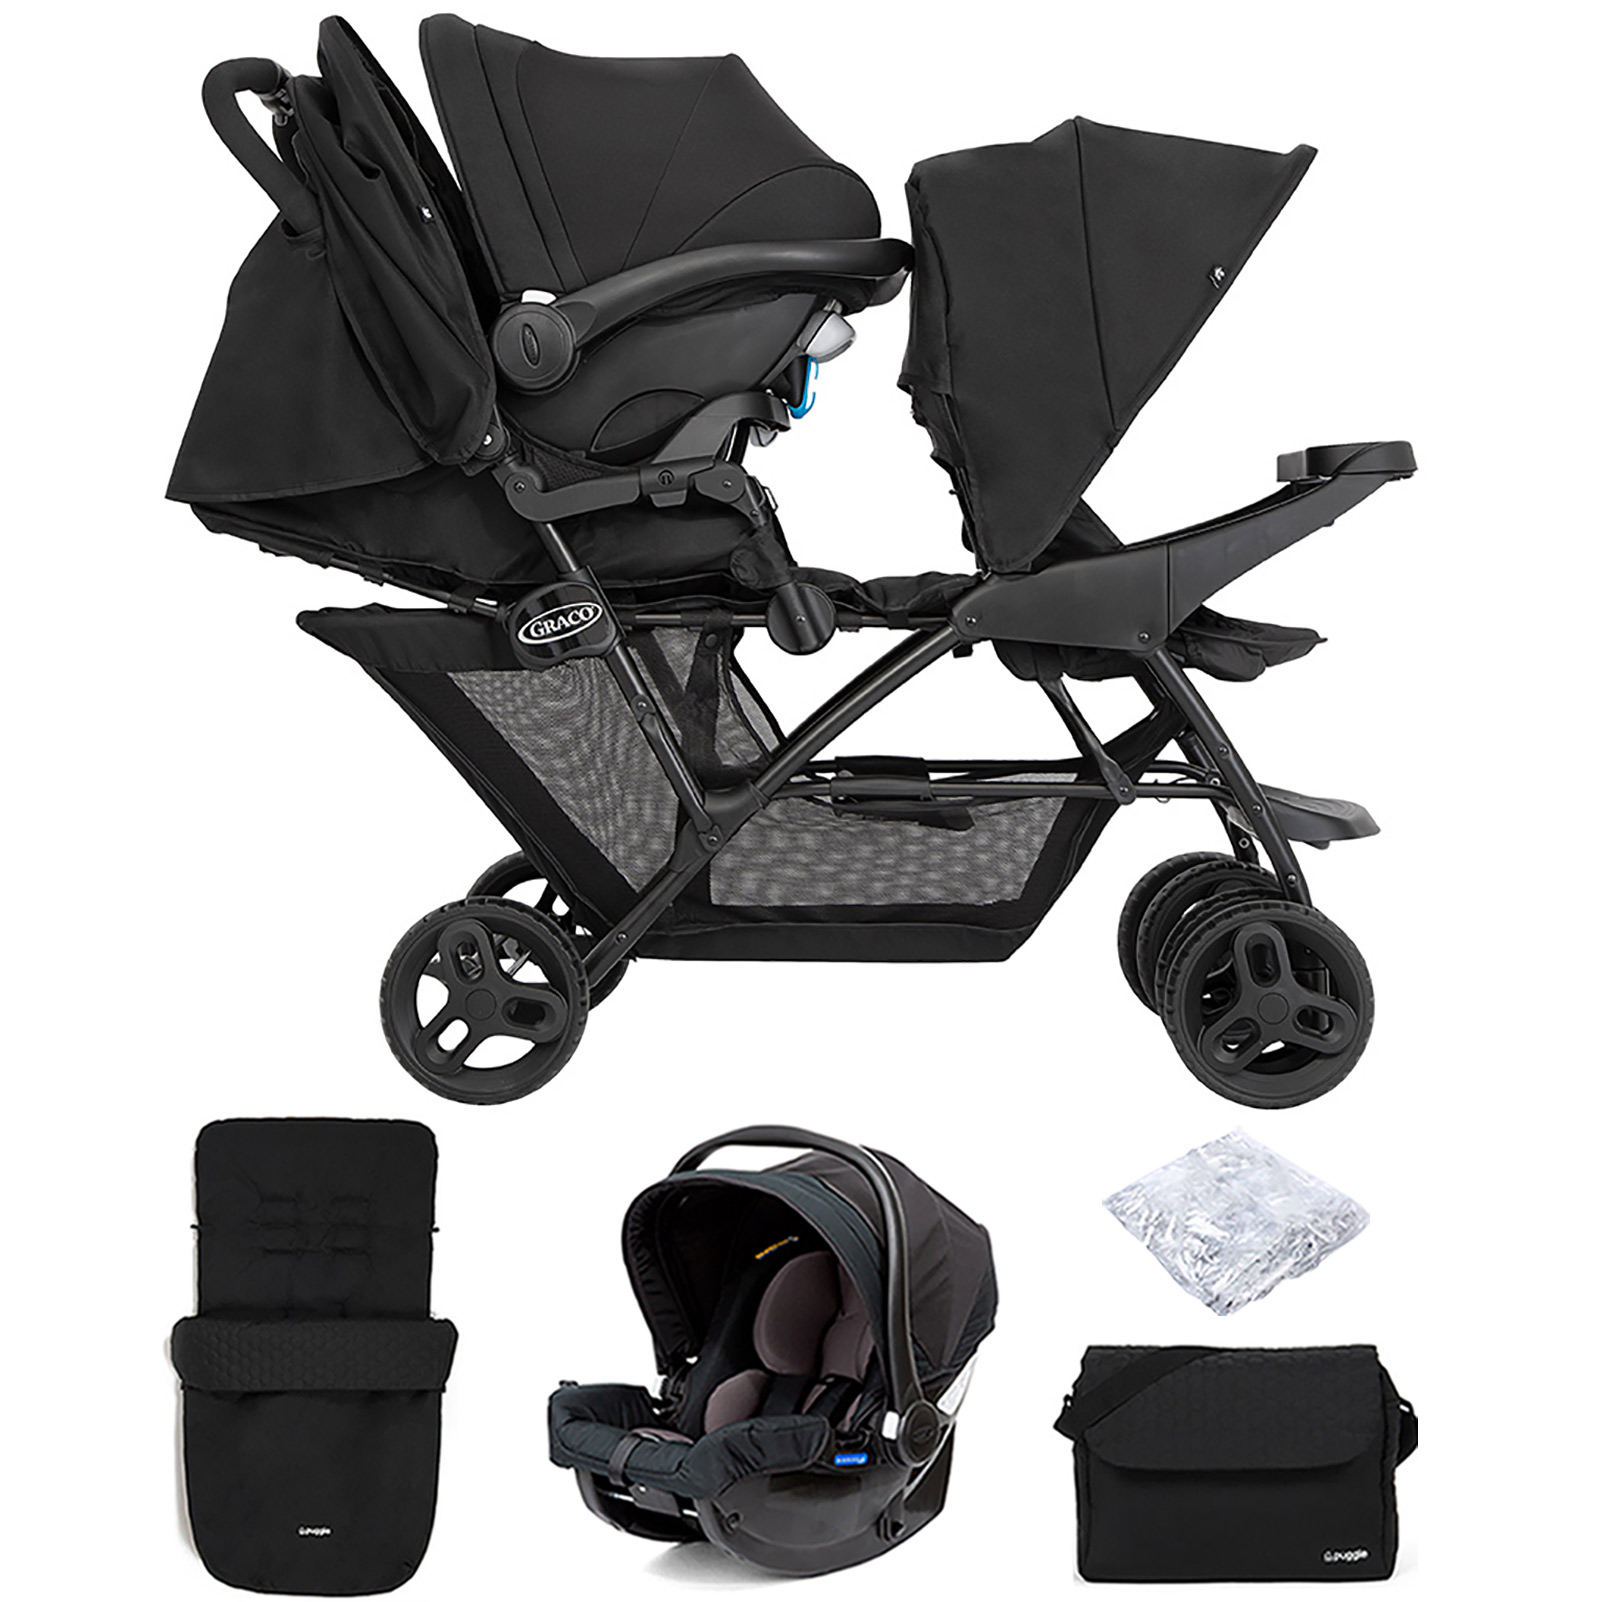 Graco Blaaze™ Stadium Duo Tandem Travel System with Front Apron, Raincover, Footmuff, Changing Bag & Car Seat - Night Sky